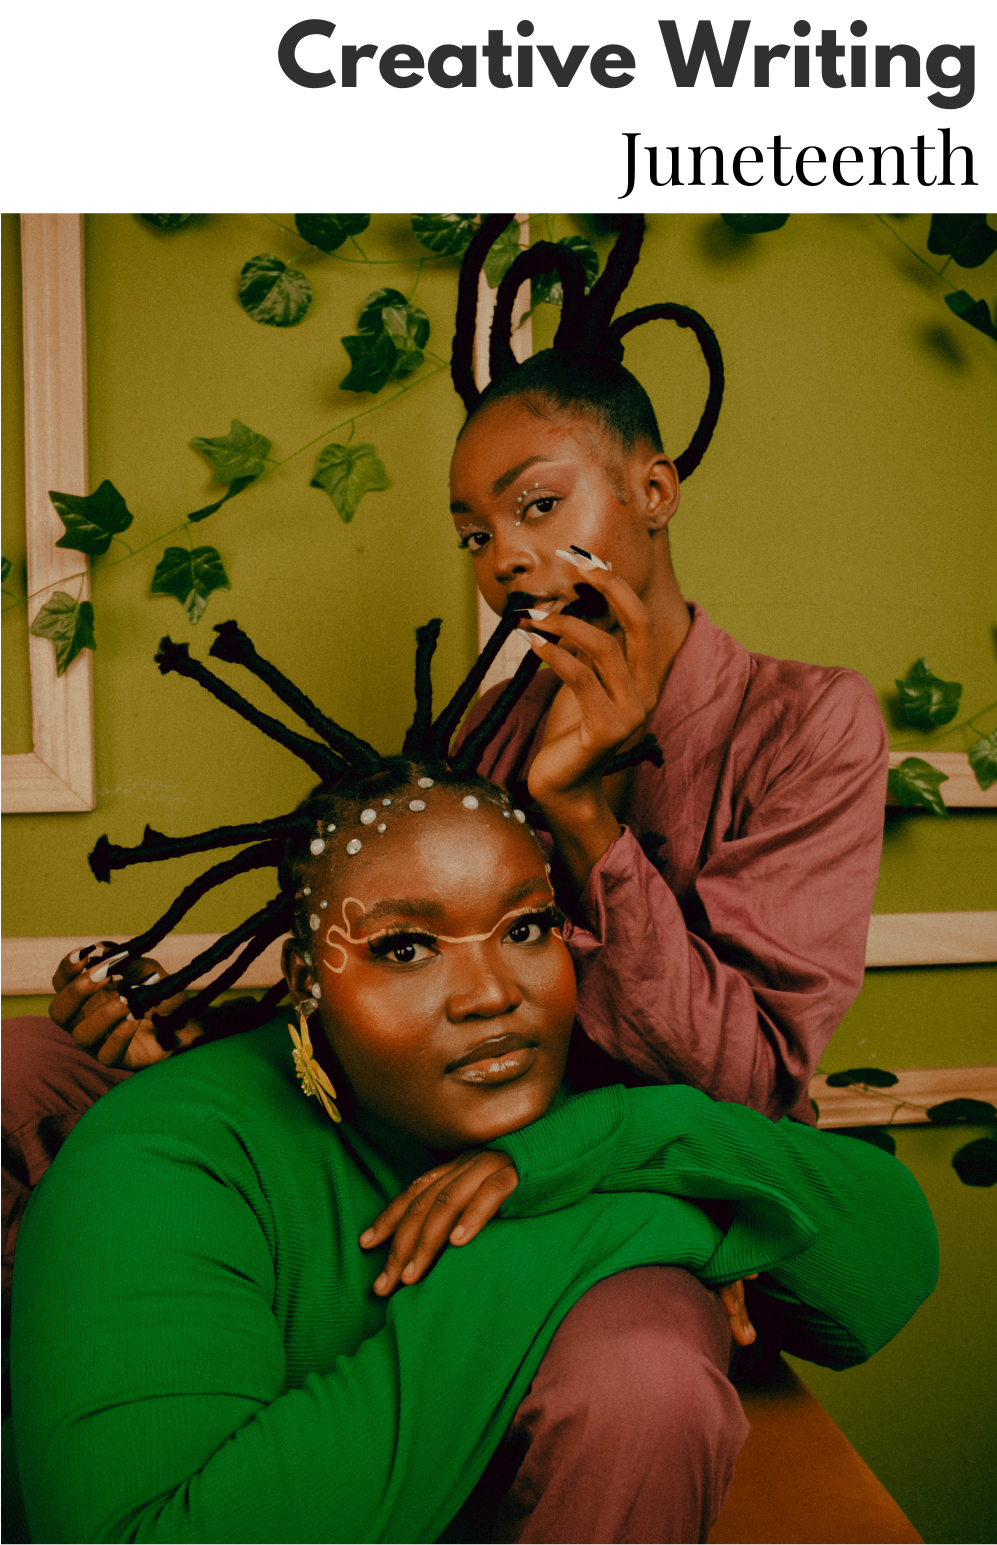 Image of two Black women, with one of them holding the other's artistically braided hair. 